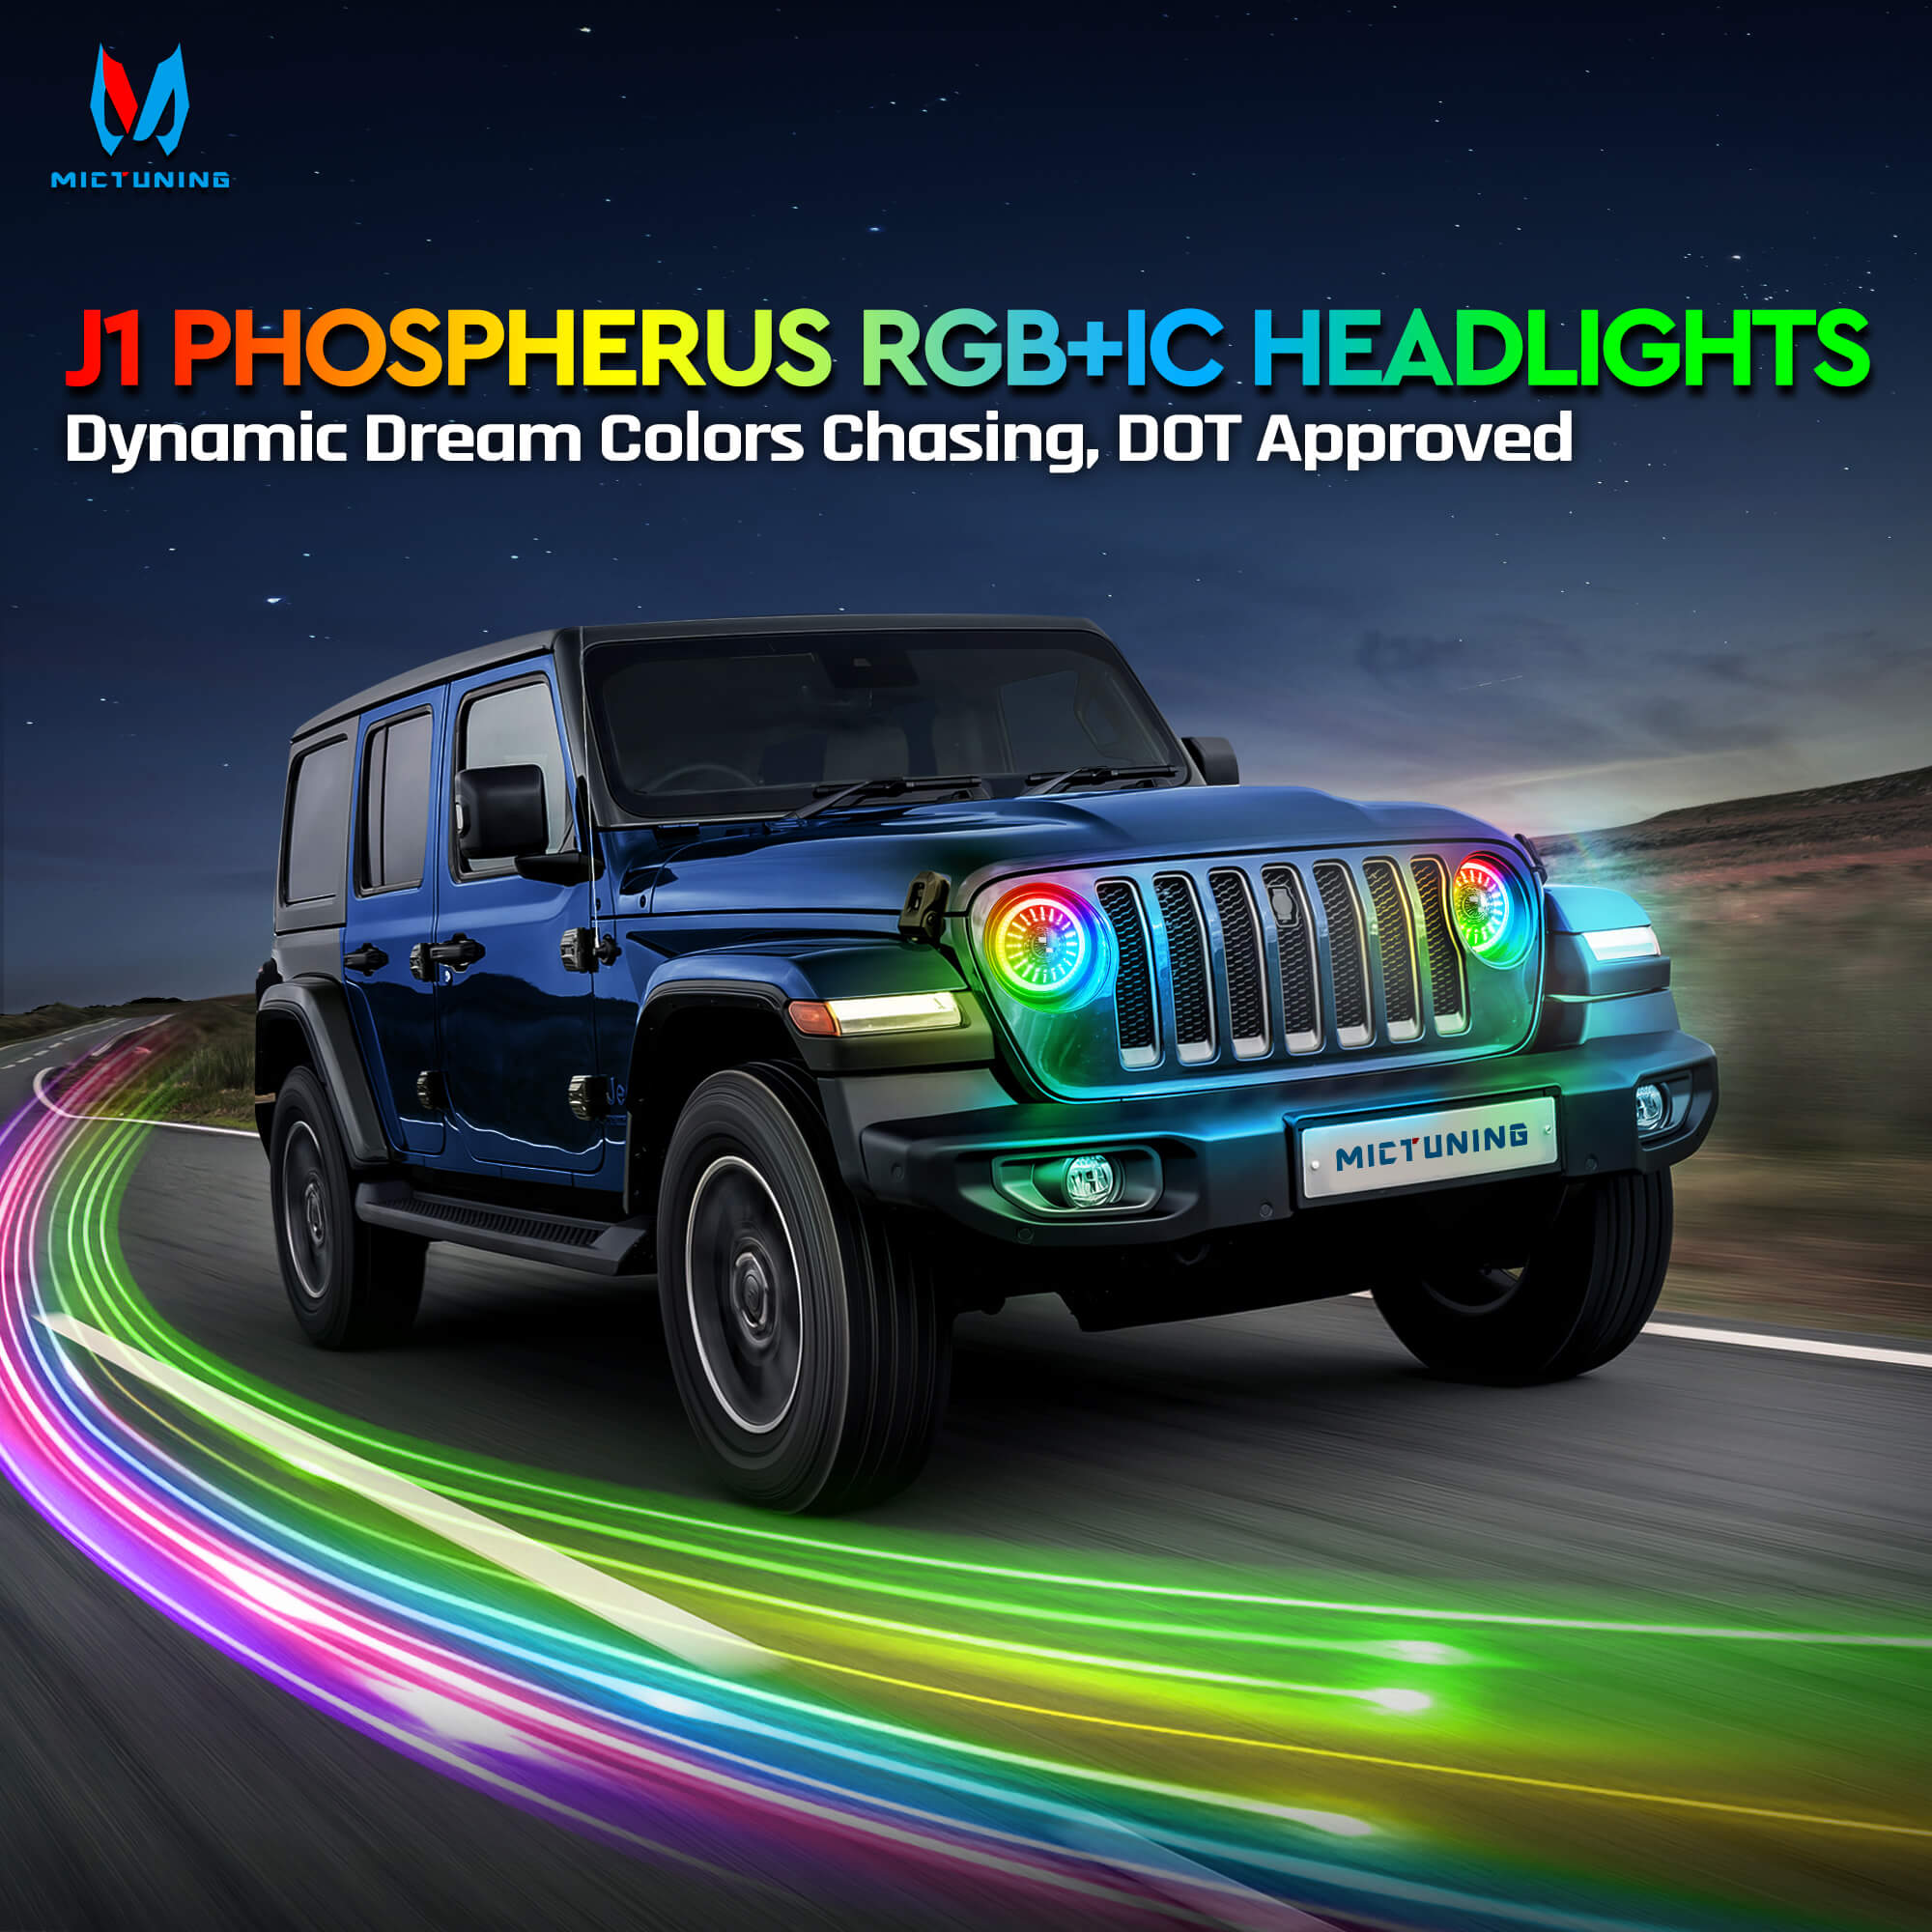 J1 RGB+IC 7″ Anti-glare LED Headlights, Multi-color Chasing, DOT Approved, For 1997-2018 Jeep Wrangler TJ JK Chevy Ford GMC